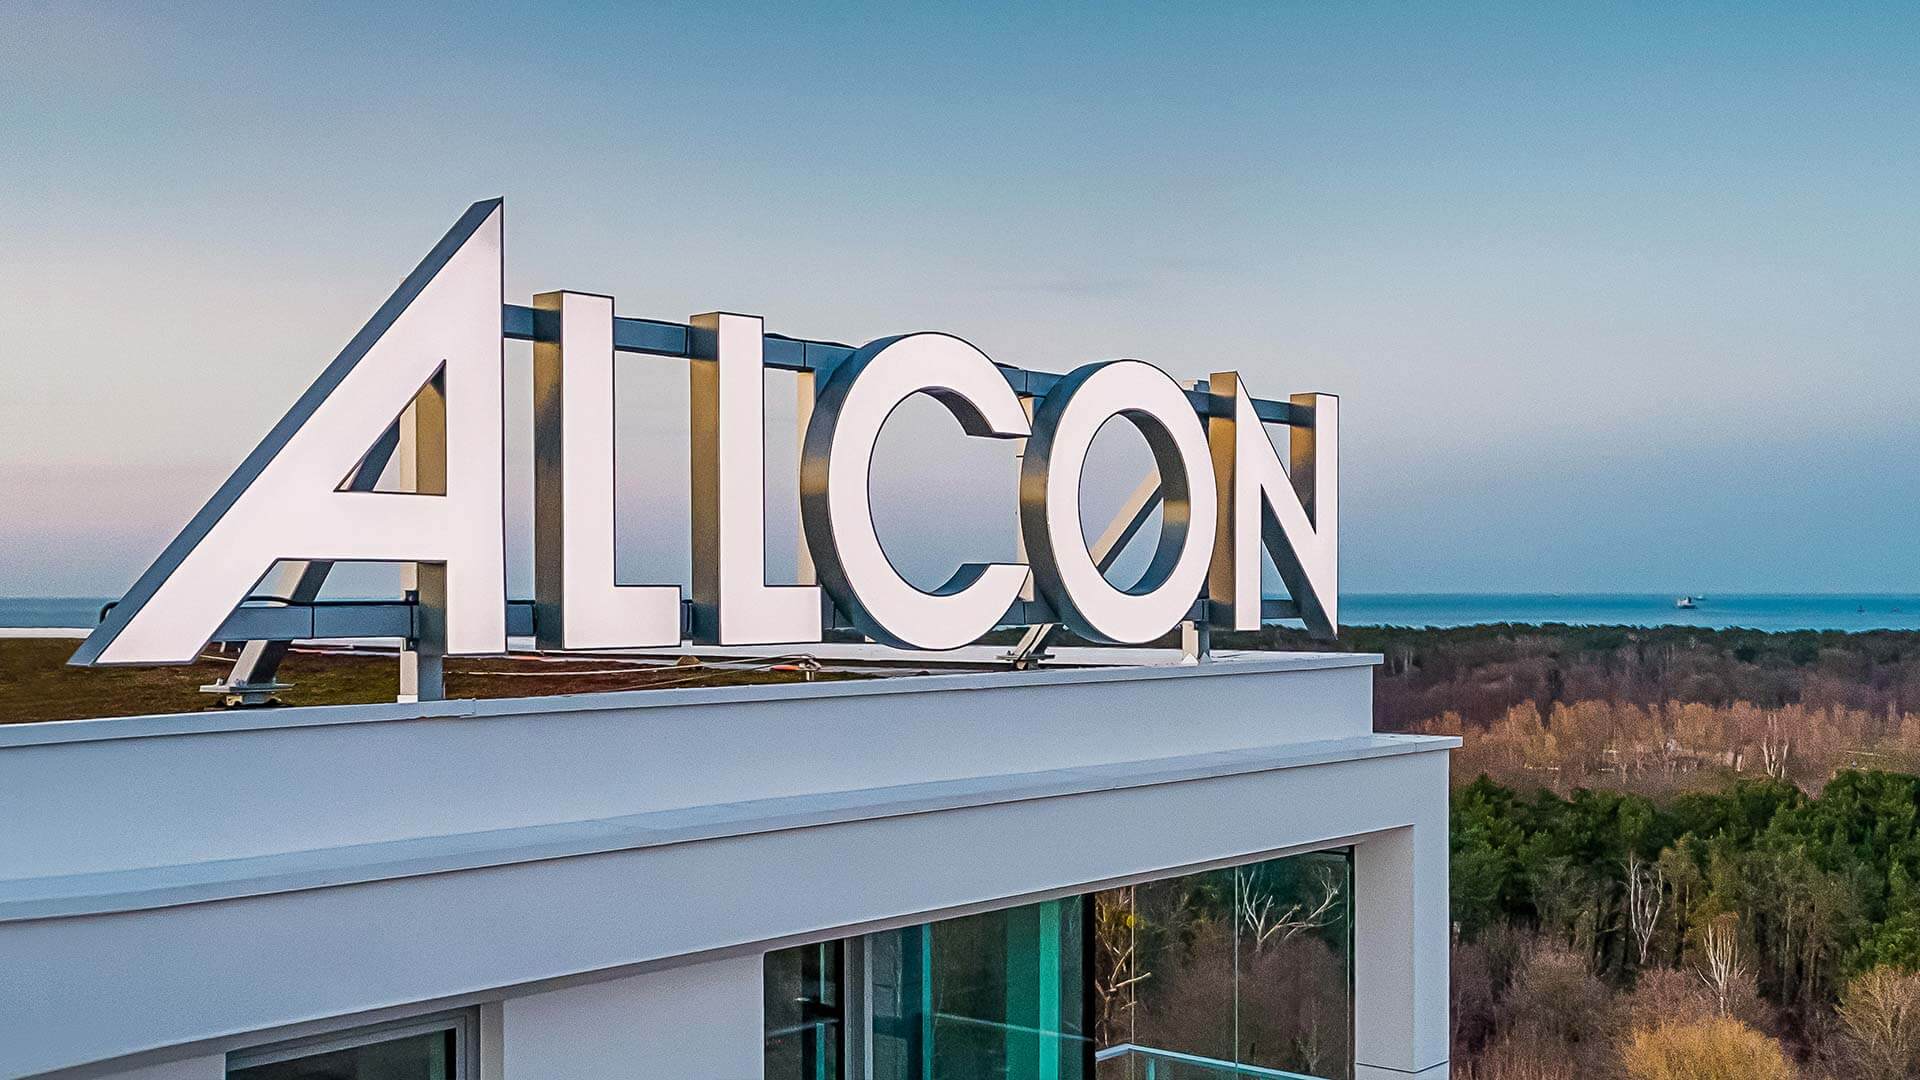 allcon-lettering-large format - allcon-3D-large-size letters made ofplexi-luminescent-luminaires on the roof of a residential building